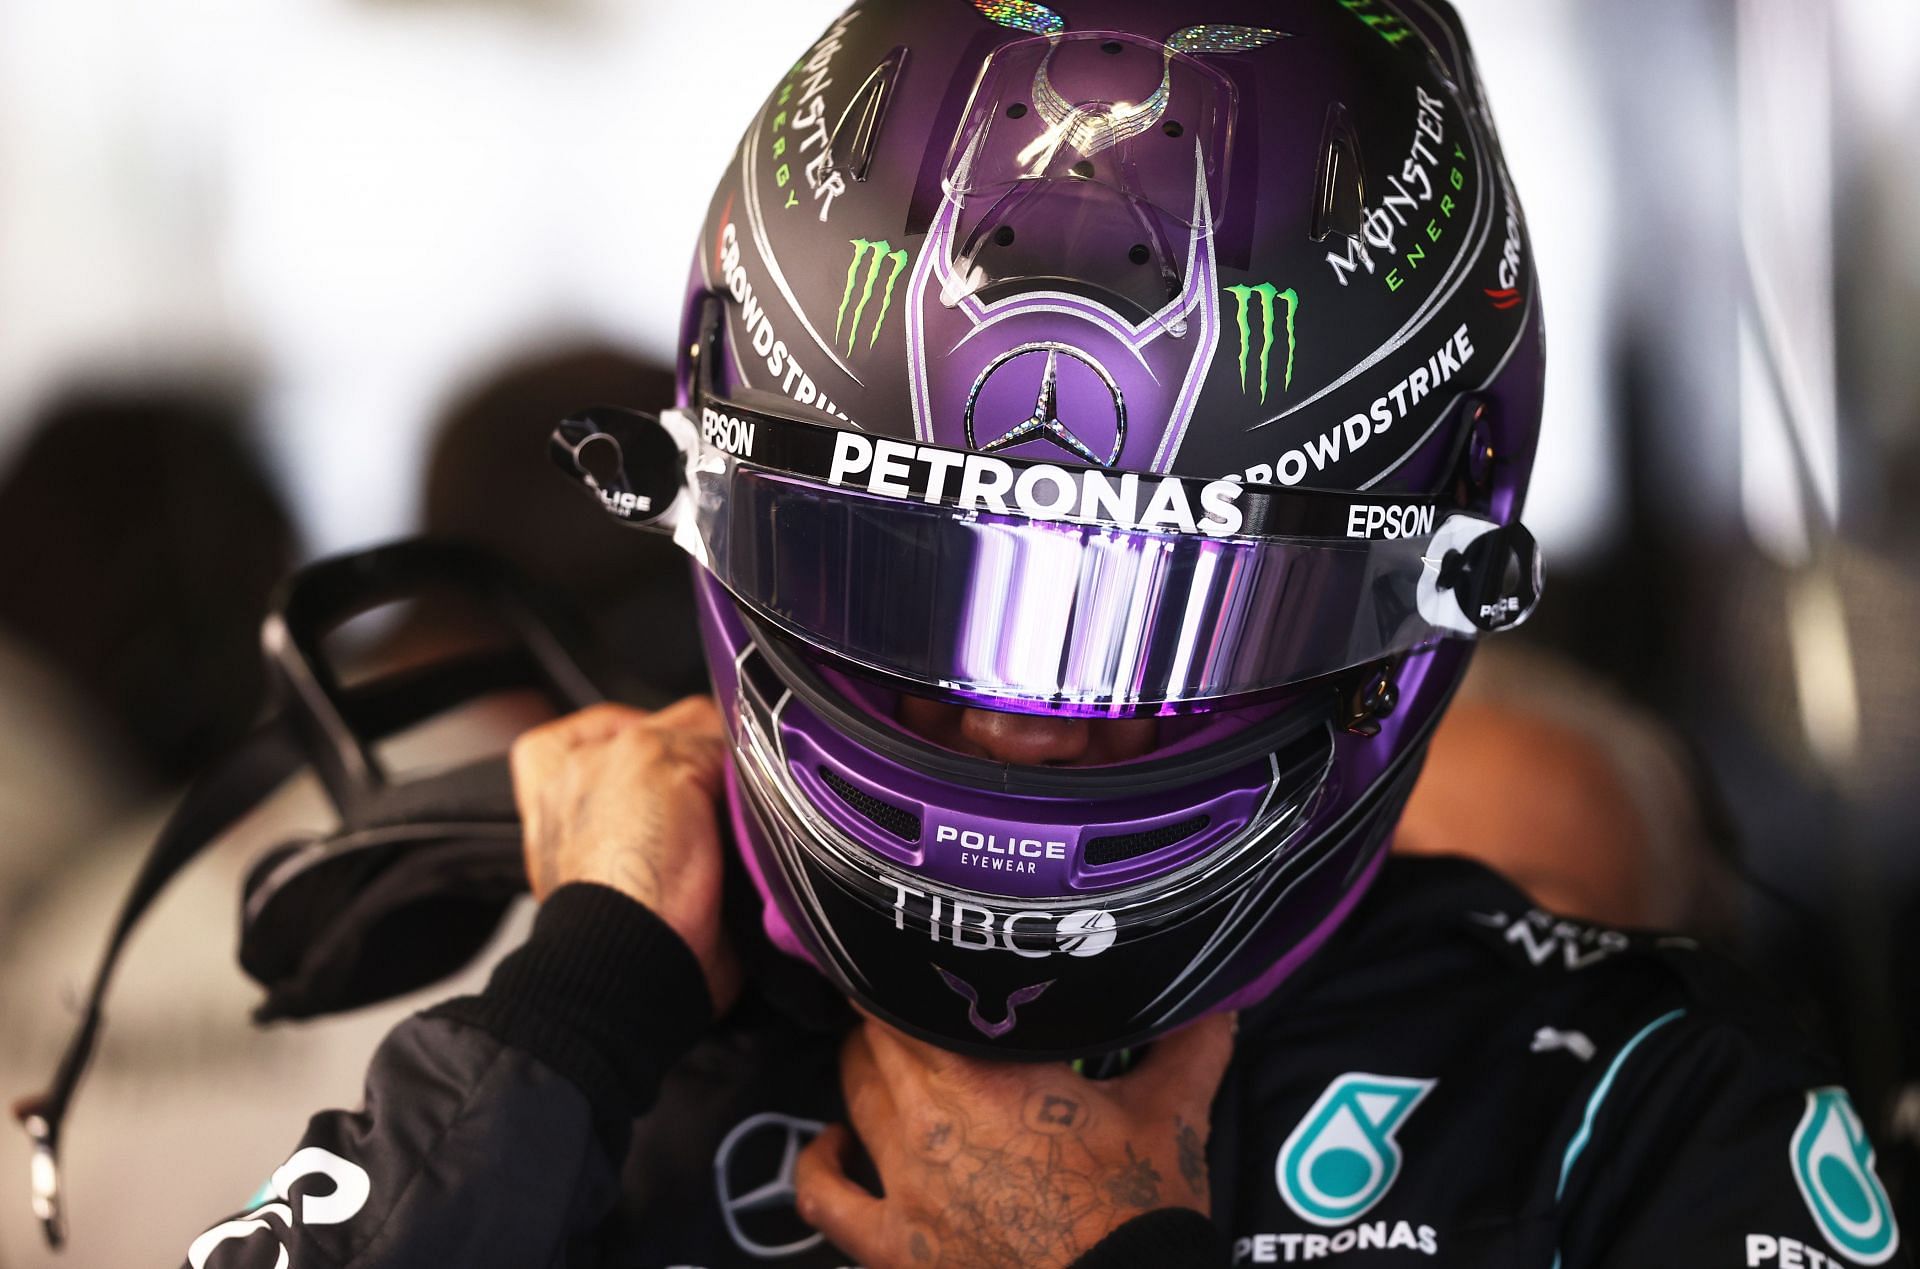 Lewis Hamilton of prepares to drive in the garage during practice session ahead of the 2021 Mexican GP. (Photo by Lars Baron/Getty Images)